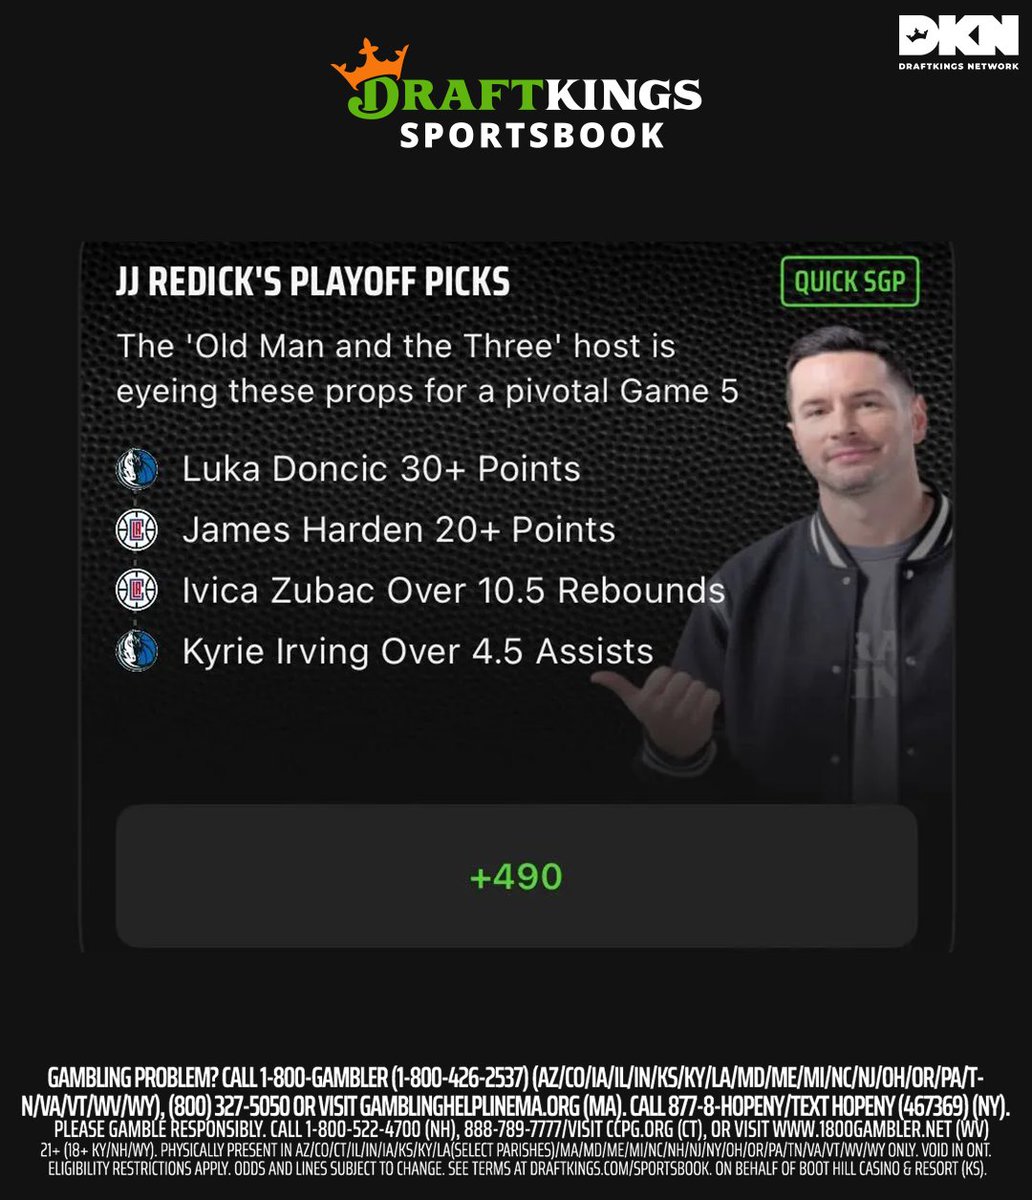 NBA SGP: Former NBA player and current NBA analyst @JJ_Redick crafted this SGP for today’s NBA action on @DKSportsbook👀👇 🏀Luka Doncic 30+ Points 🏀James Harden 20+ Points 🏀Ivica Zubac Over 10.5 Rebounds 🏀Kyrie Irving Over 4.5 Assists Odds (+490)